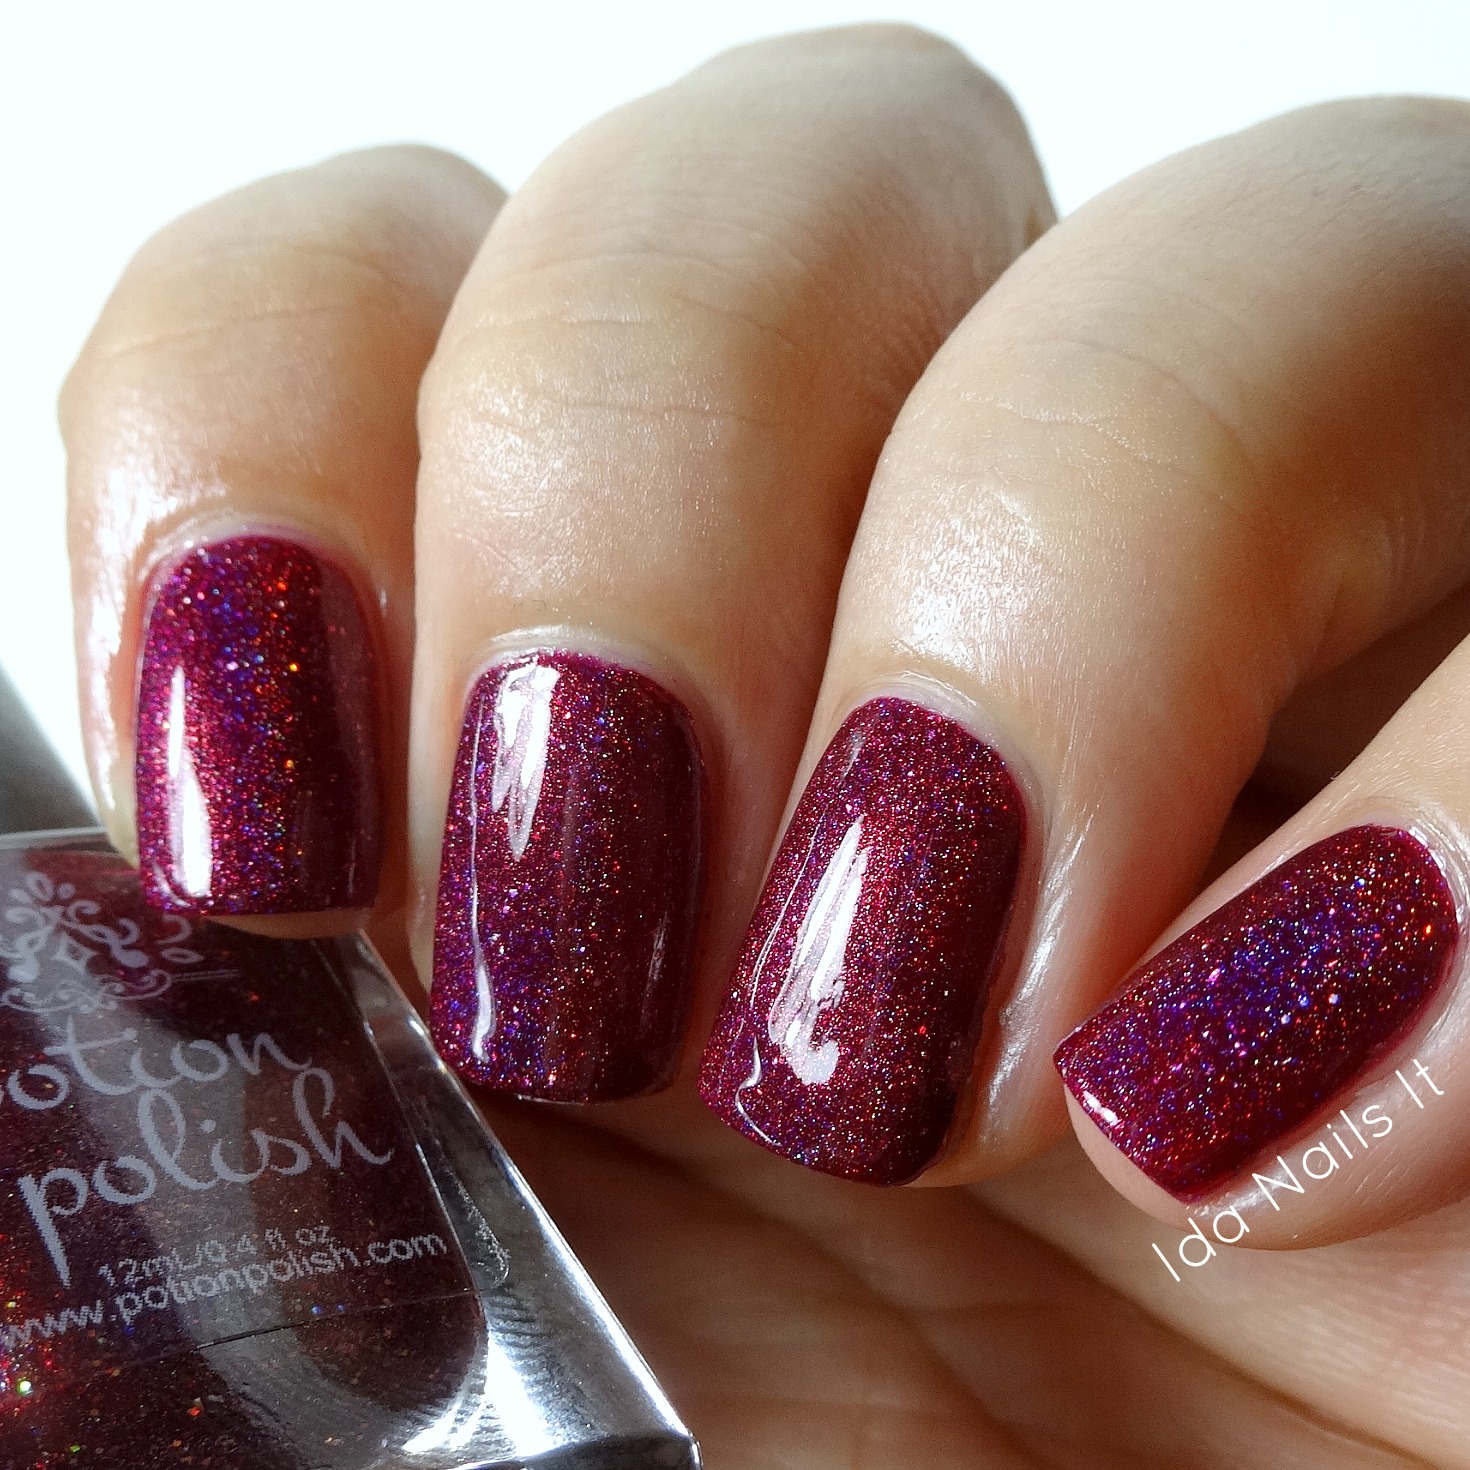 Ida Nails It: Potion Polish Christmas 2016 Collection: Swatches and Review